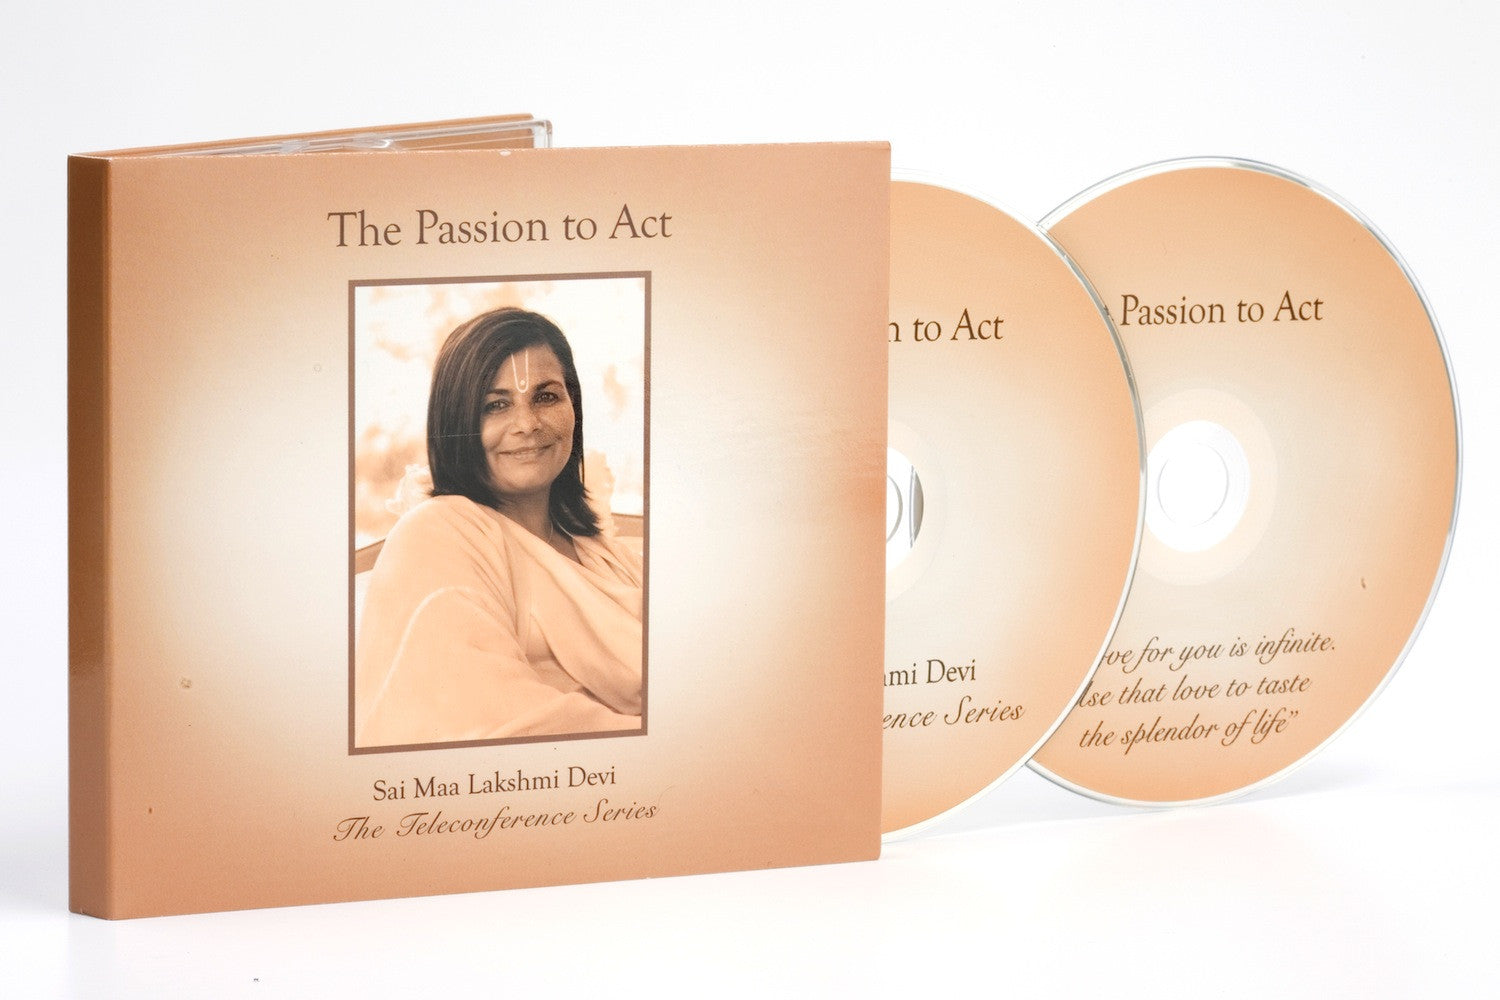 The Passion to Act